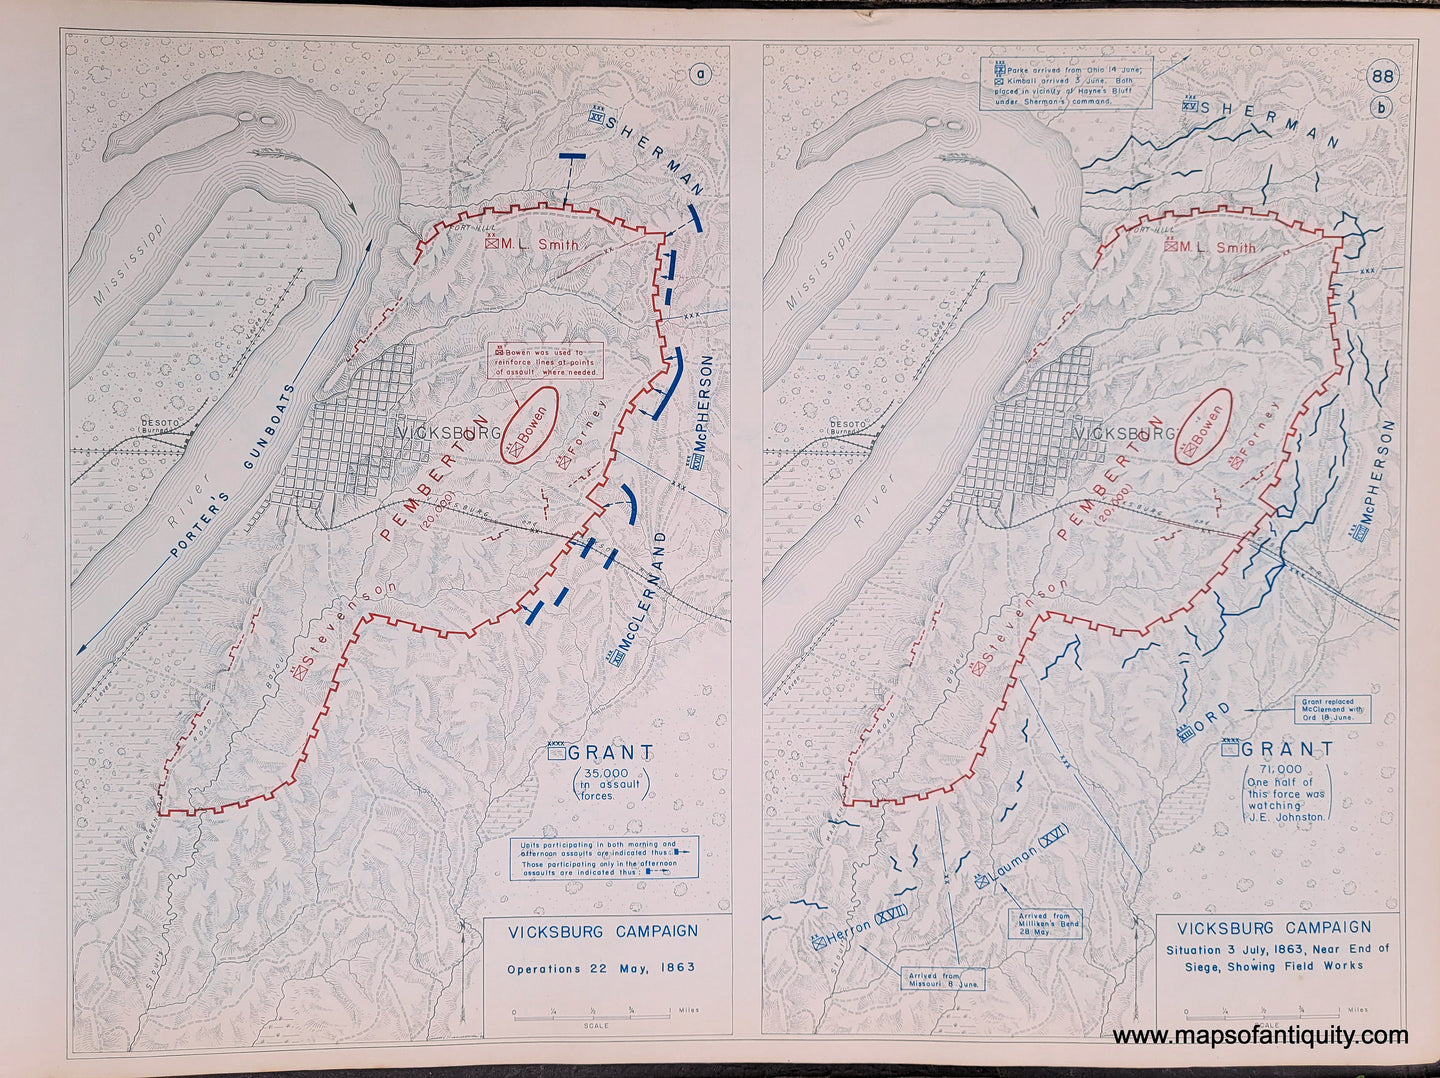 Genuine-Antique-Map-Vicksburg-Campaign-Operations-22-May-1863-and-Situation-3-July-1863-Near-End-of-Siege-Showing-Field-Works-1948-Matthew-Forney-Steele-Dept-of-Military-Art-and-Engineering-US-Military-Academy-West-Point-Maps-Of-Antiquity